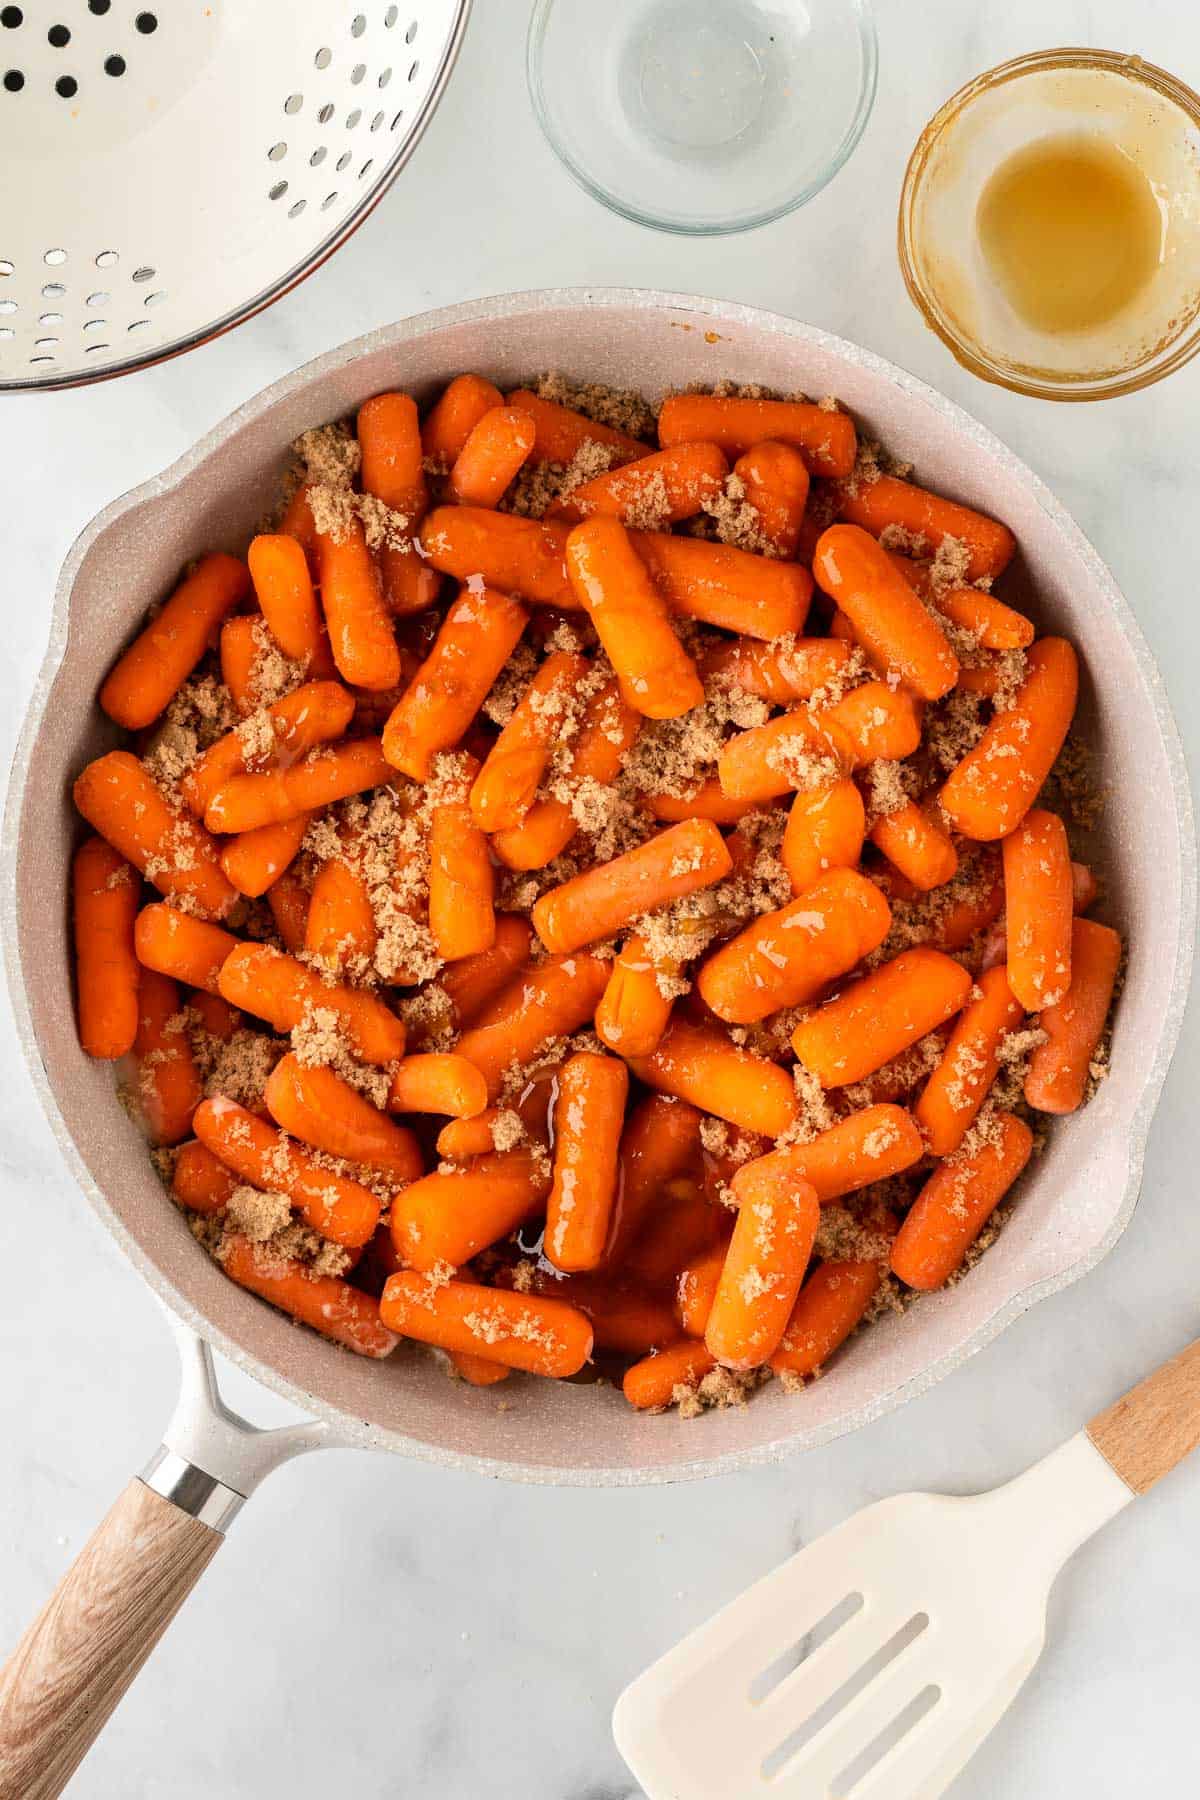 adding brown sugar to the carrots